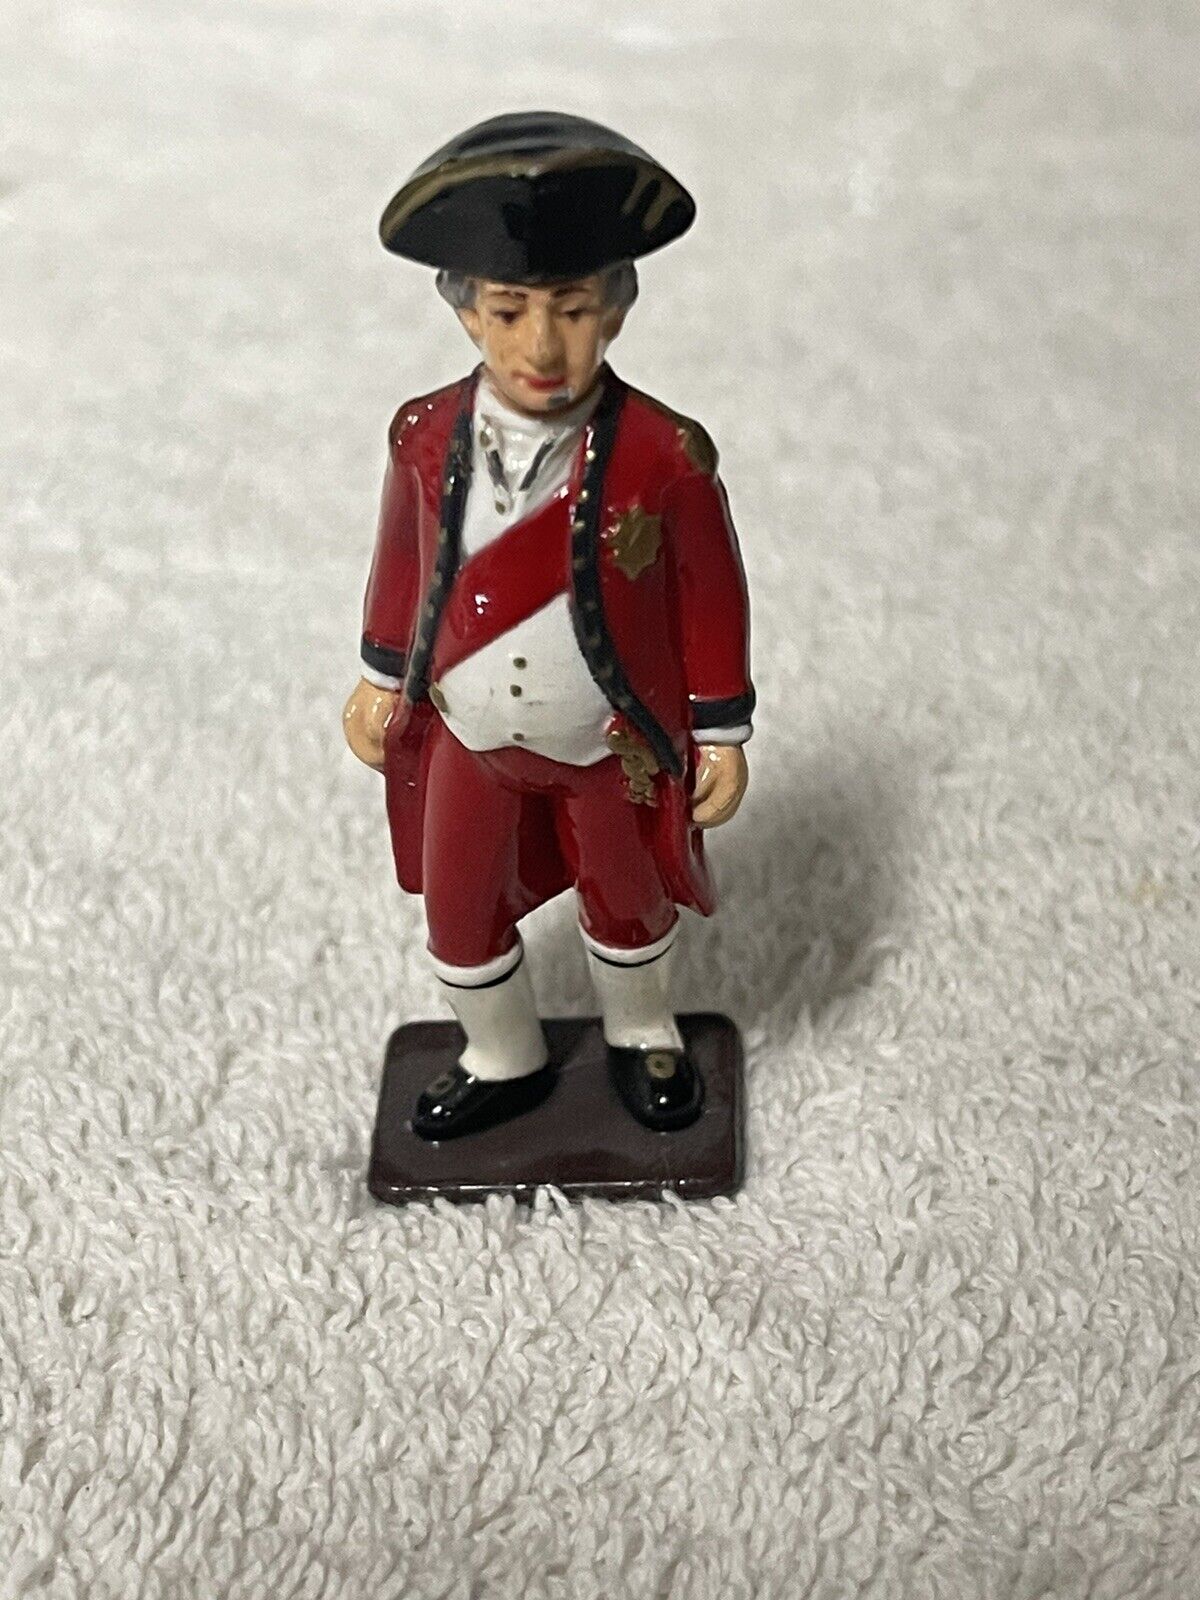 Vintage Pewter Hand Painted British Soldier Officer 2.5”